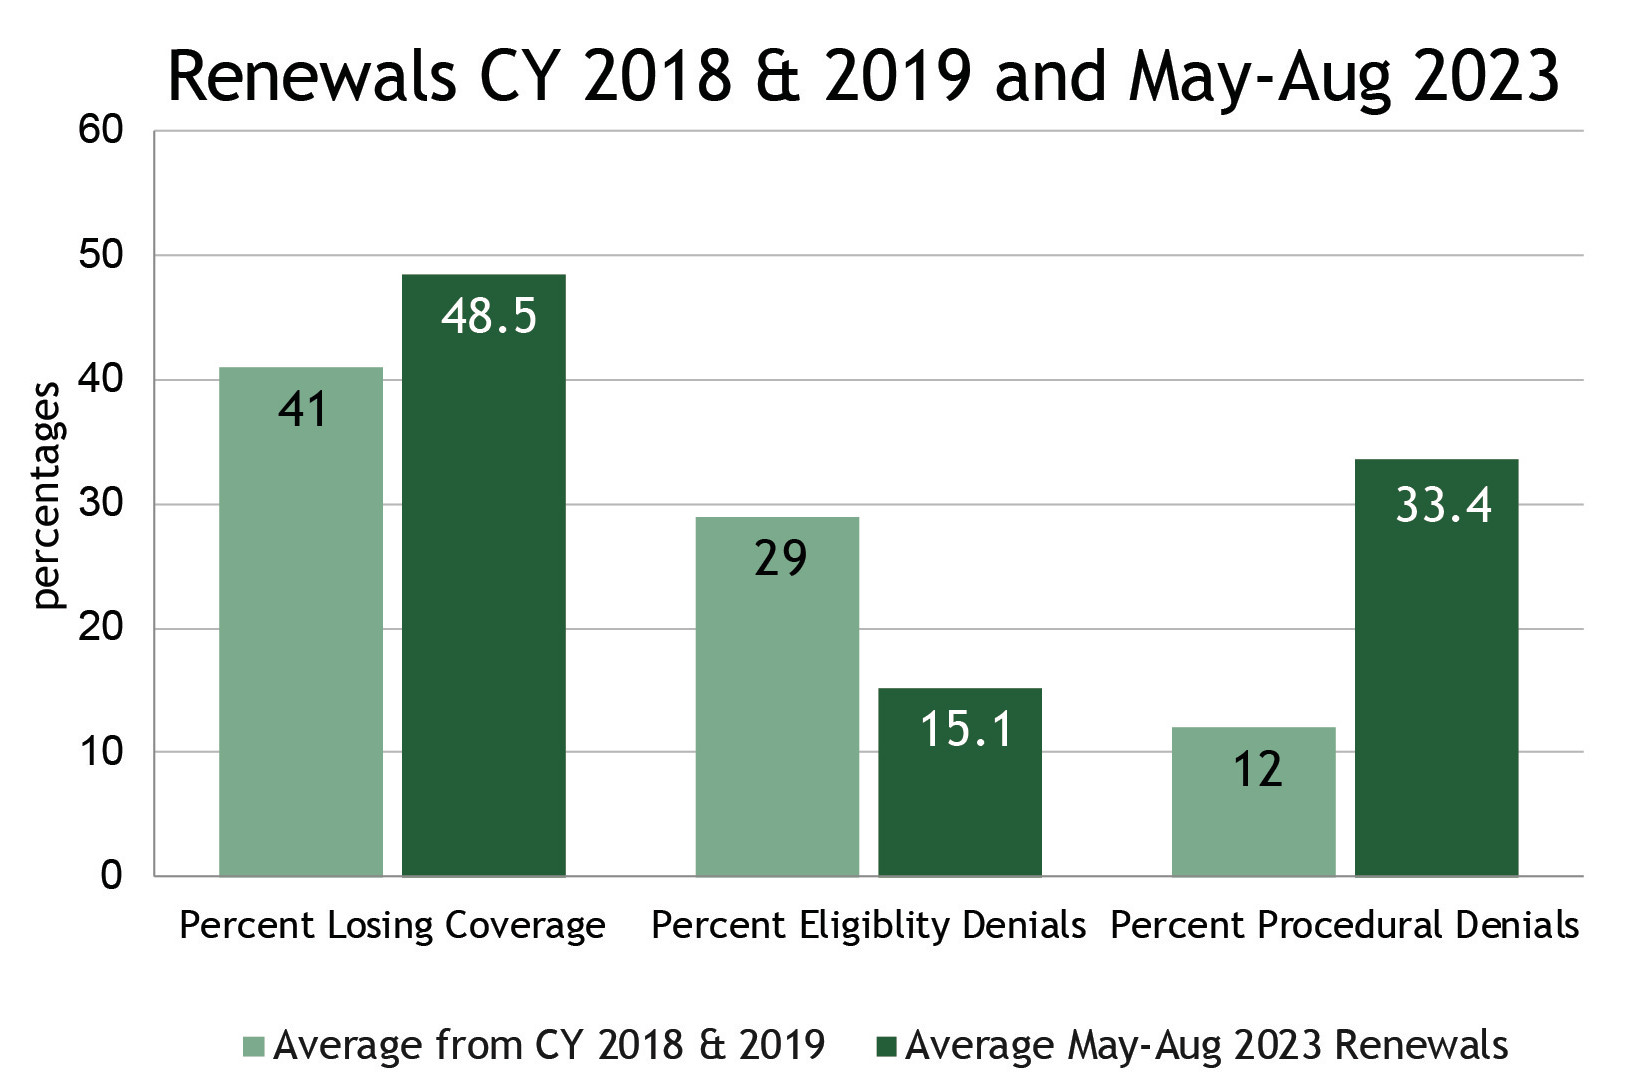 Bar chart of average renewals from calendar years 2018/19 and May through August 2023 showing losing coverage 2018/19 at 41% and May-Aug 2023 48.5%, eligibility denials 2018/19 at 29% and May- Aug 15.1%, and procedural denials 2018/19 at 12% and May- Aug 33.4%.